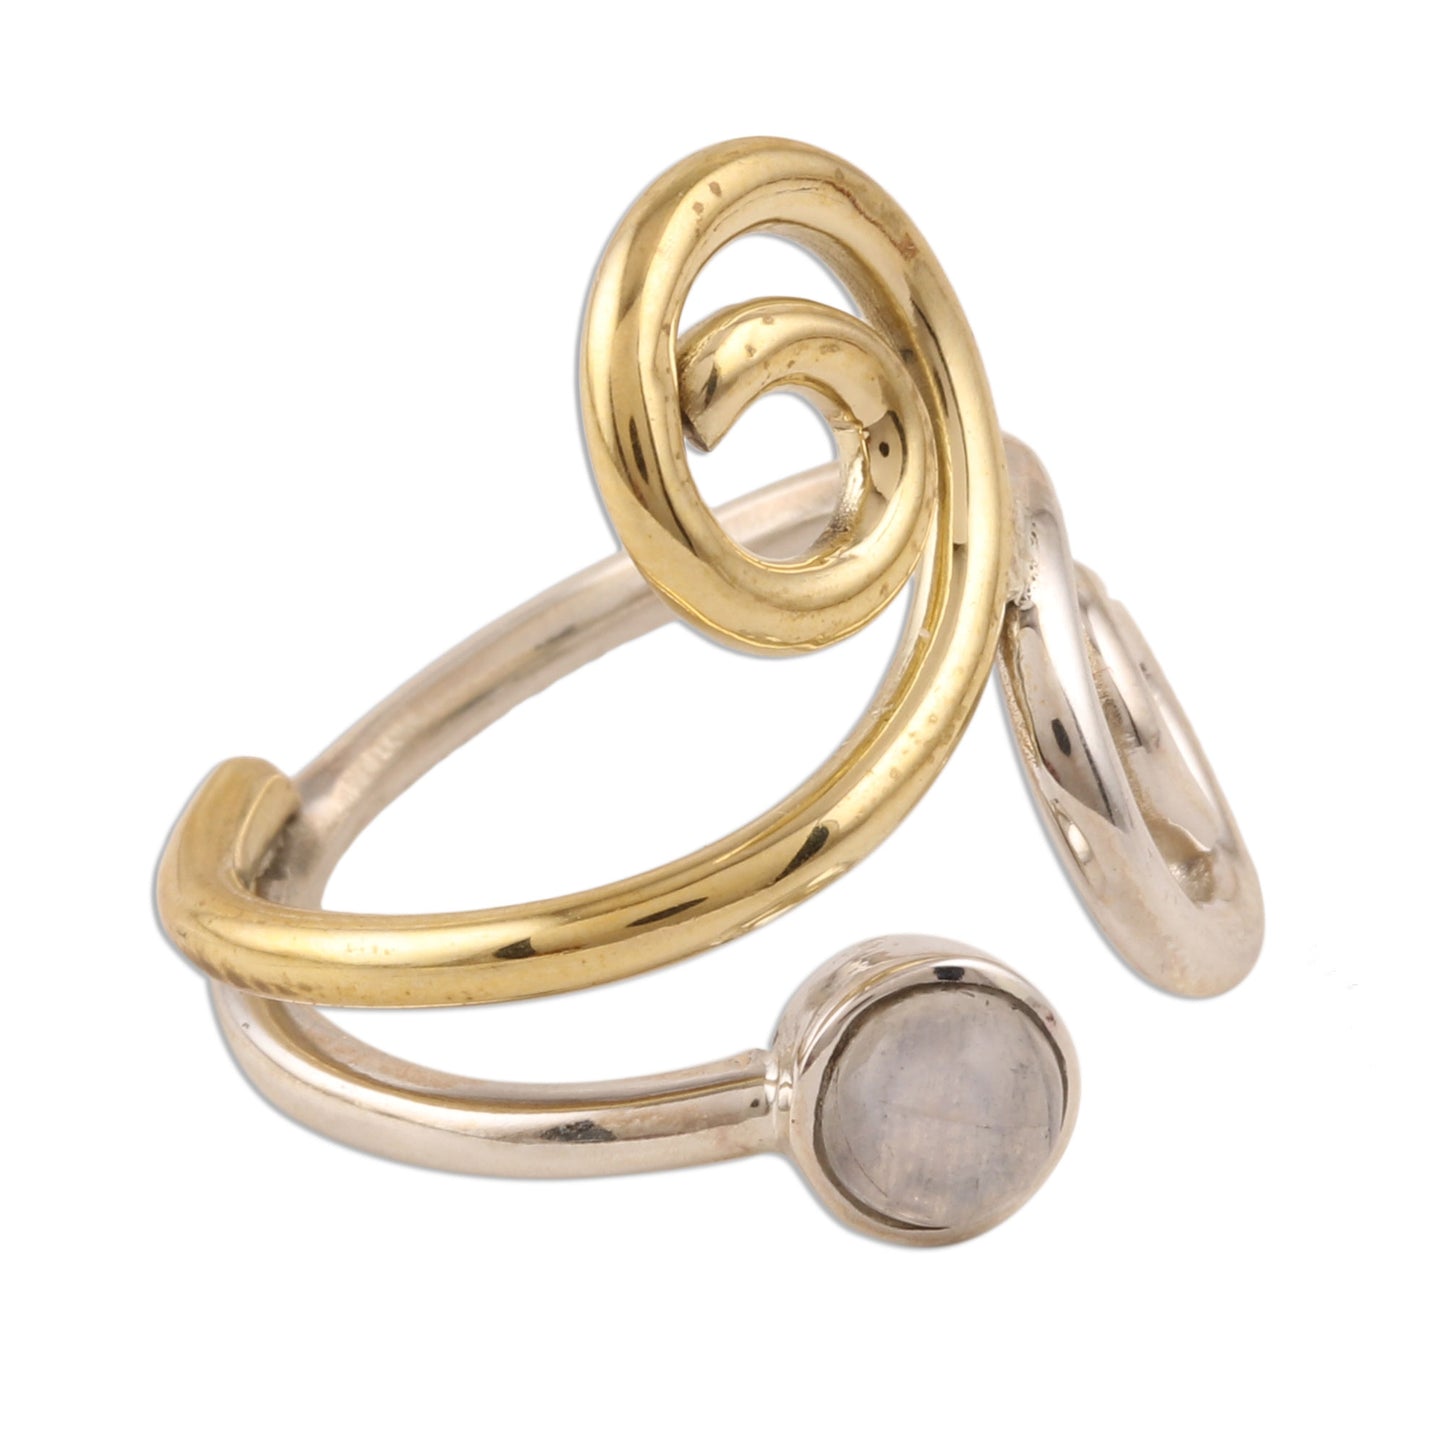 Curling Union Rainbow Moonstone Ring with Sterling Silver and Brass